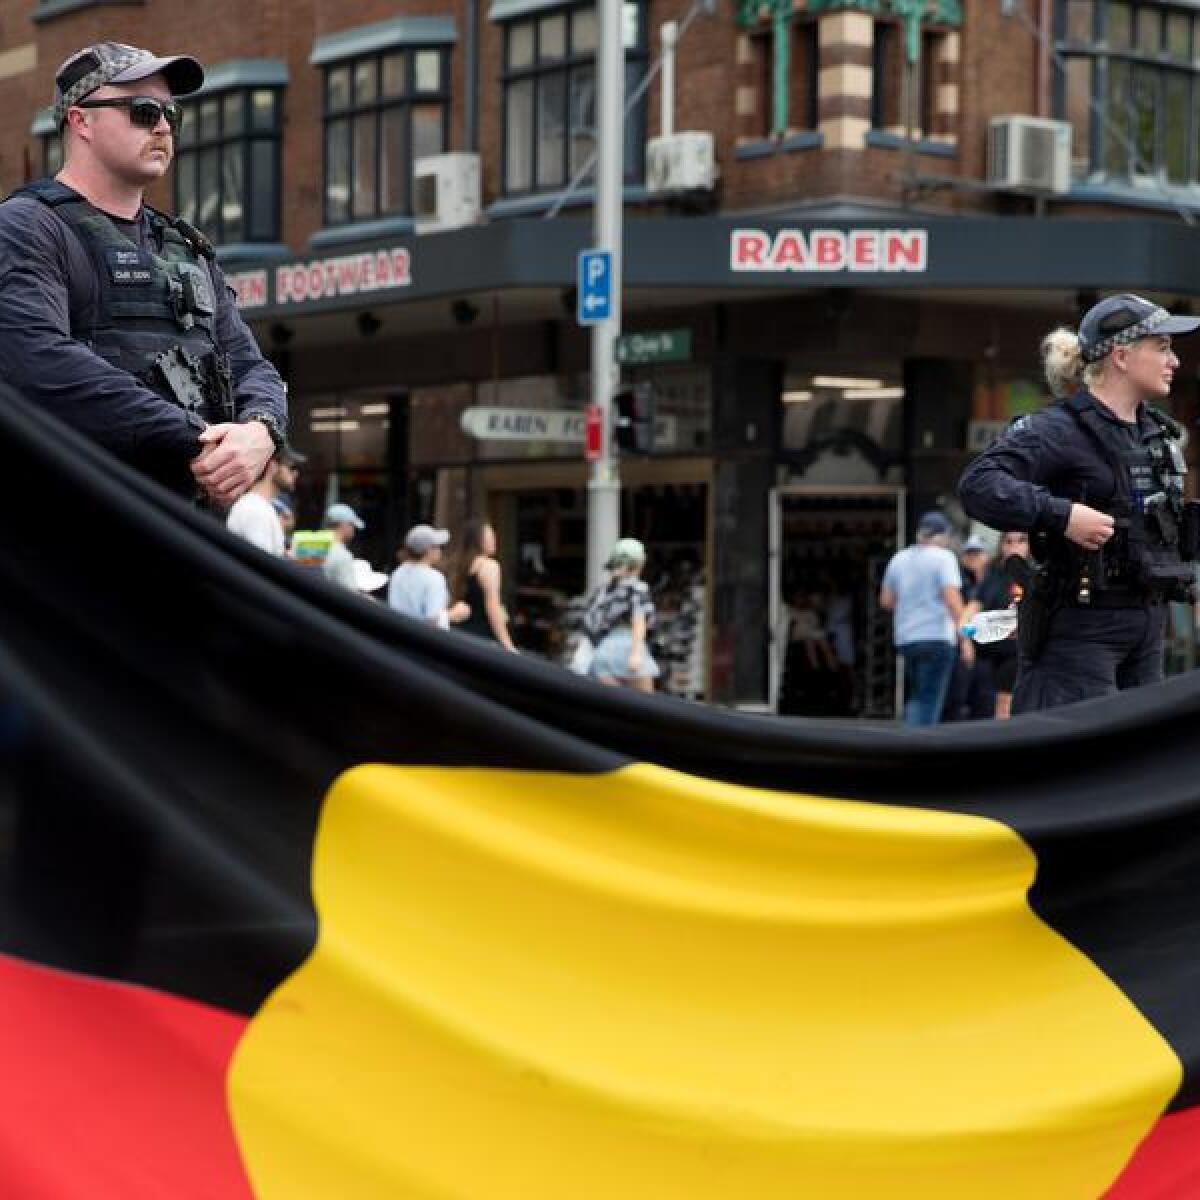 Police officers stand near an aboriginal flag